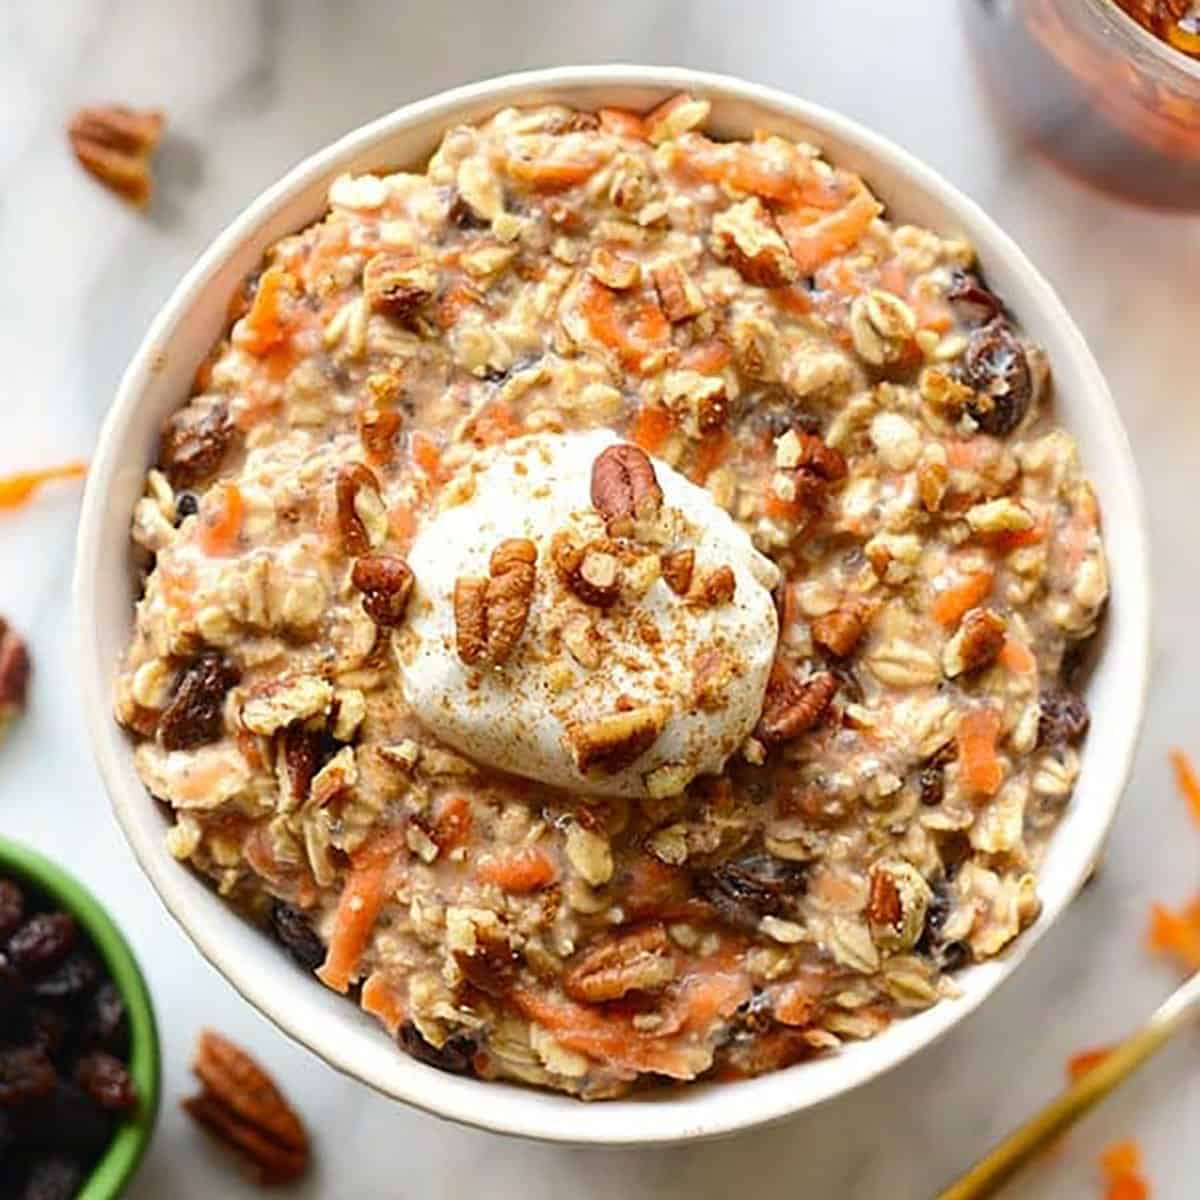 https://fitfoodiefinds.com/wp-content/uploads/2023/07/carrot-cake-overnight-oats-1.jpg